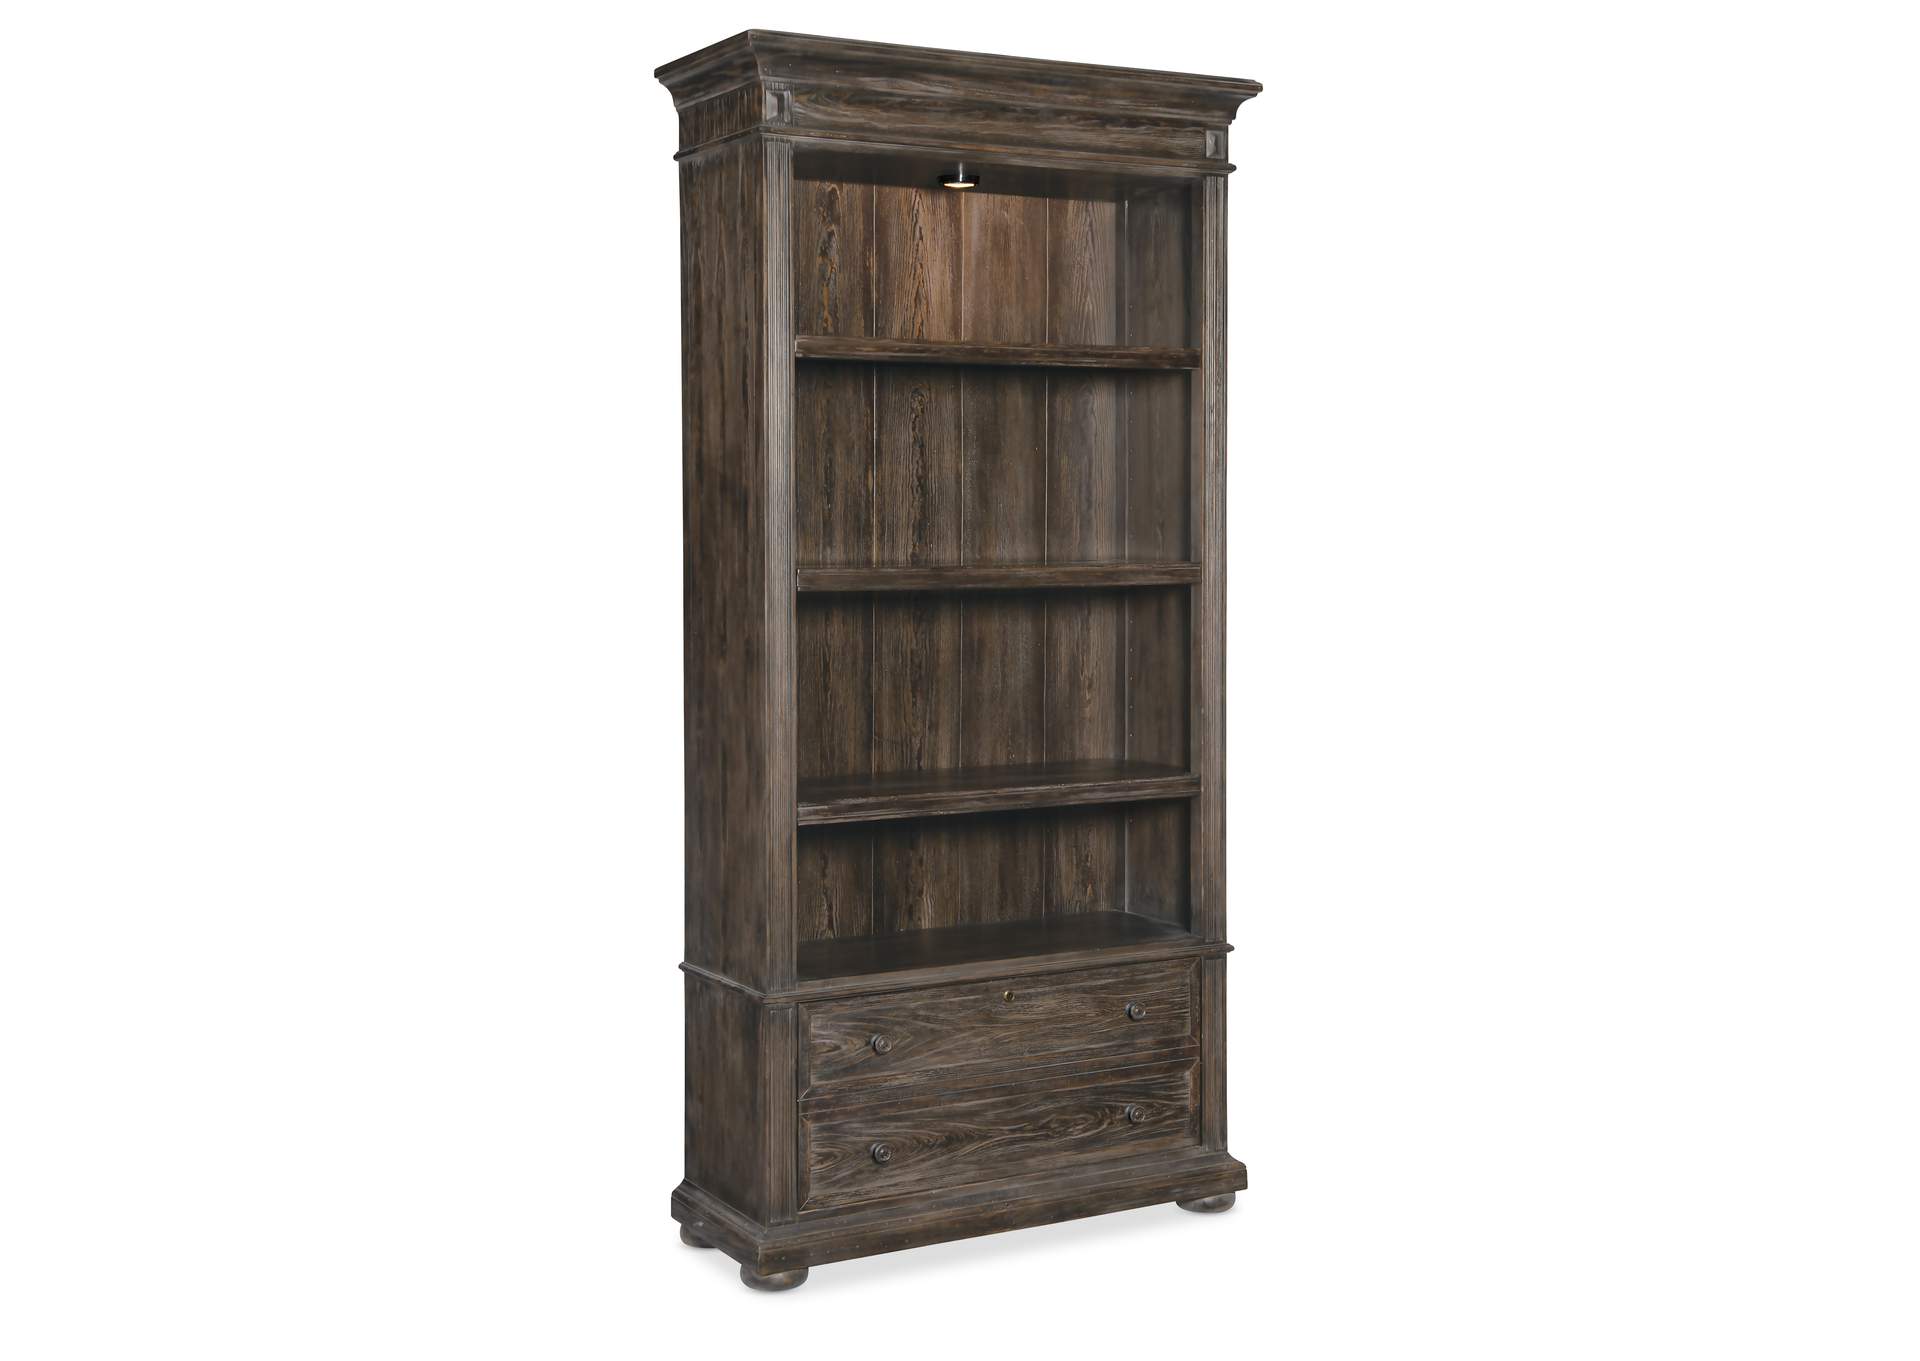 Traditions Bookcase,Hooker Furniture